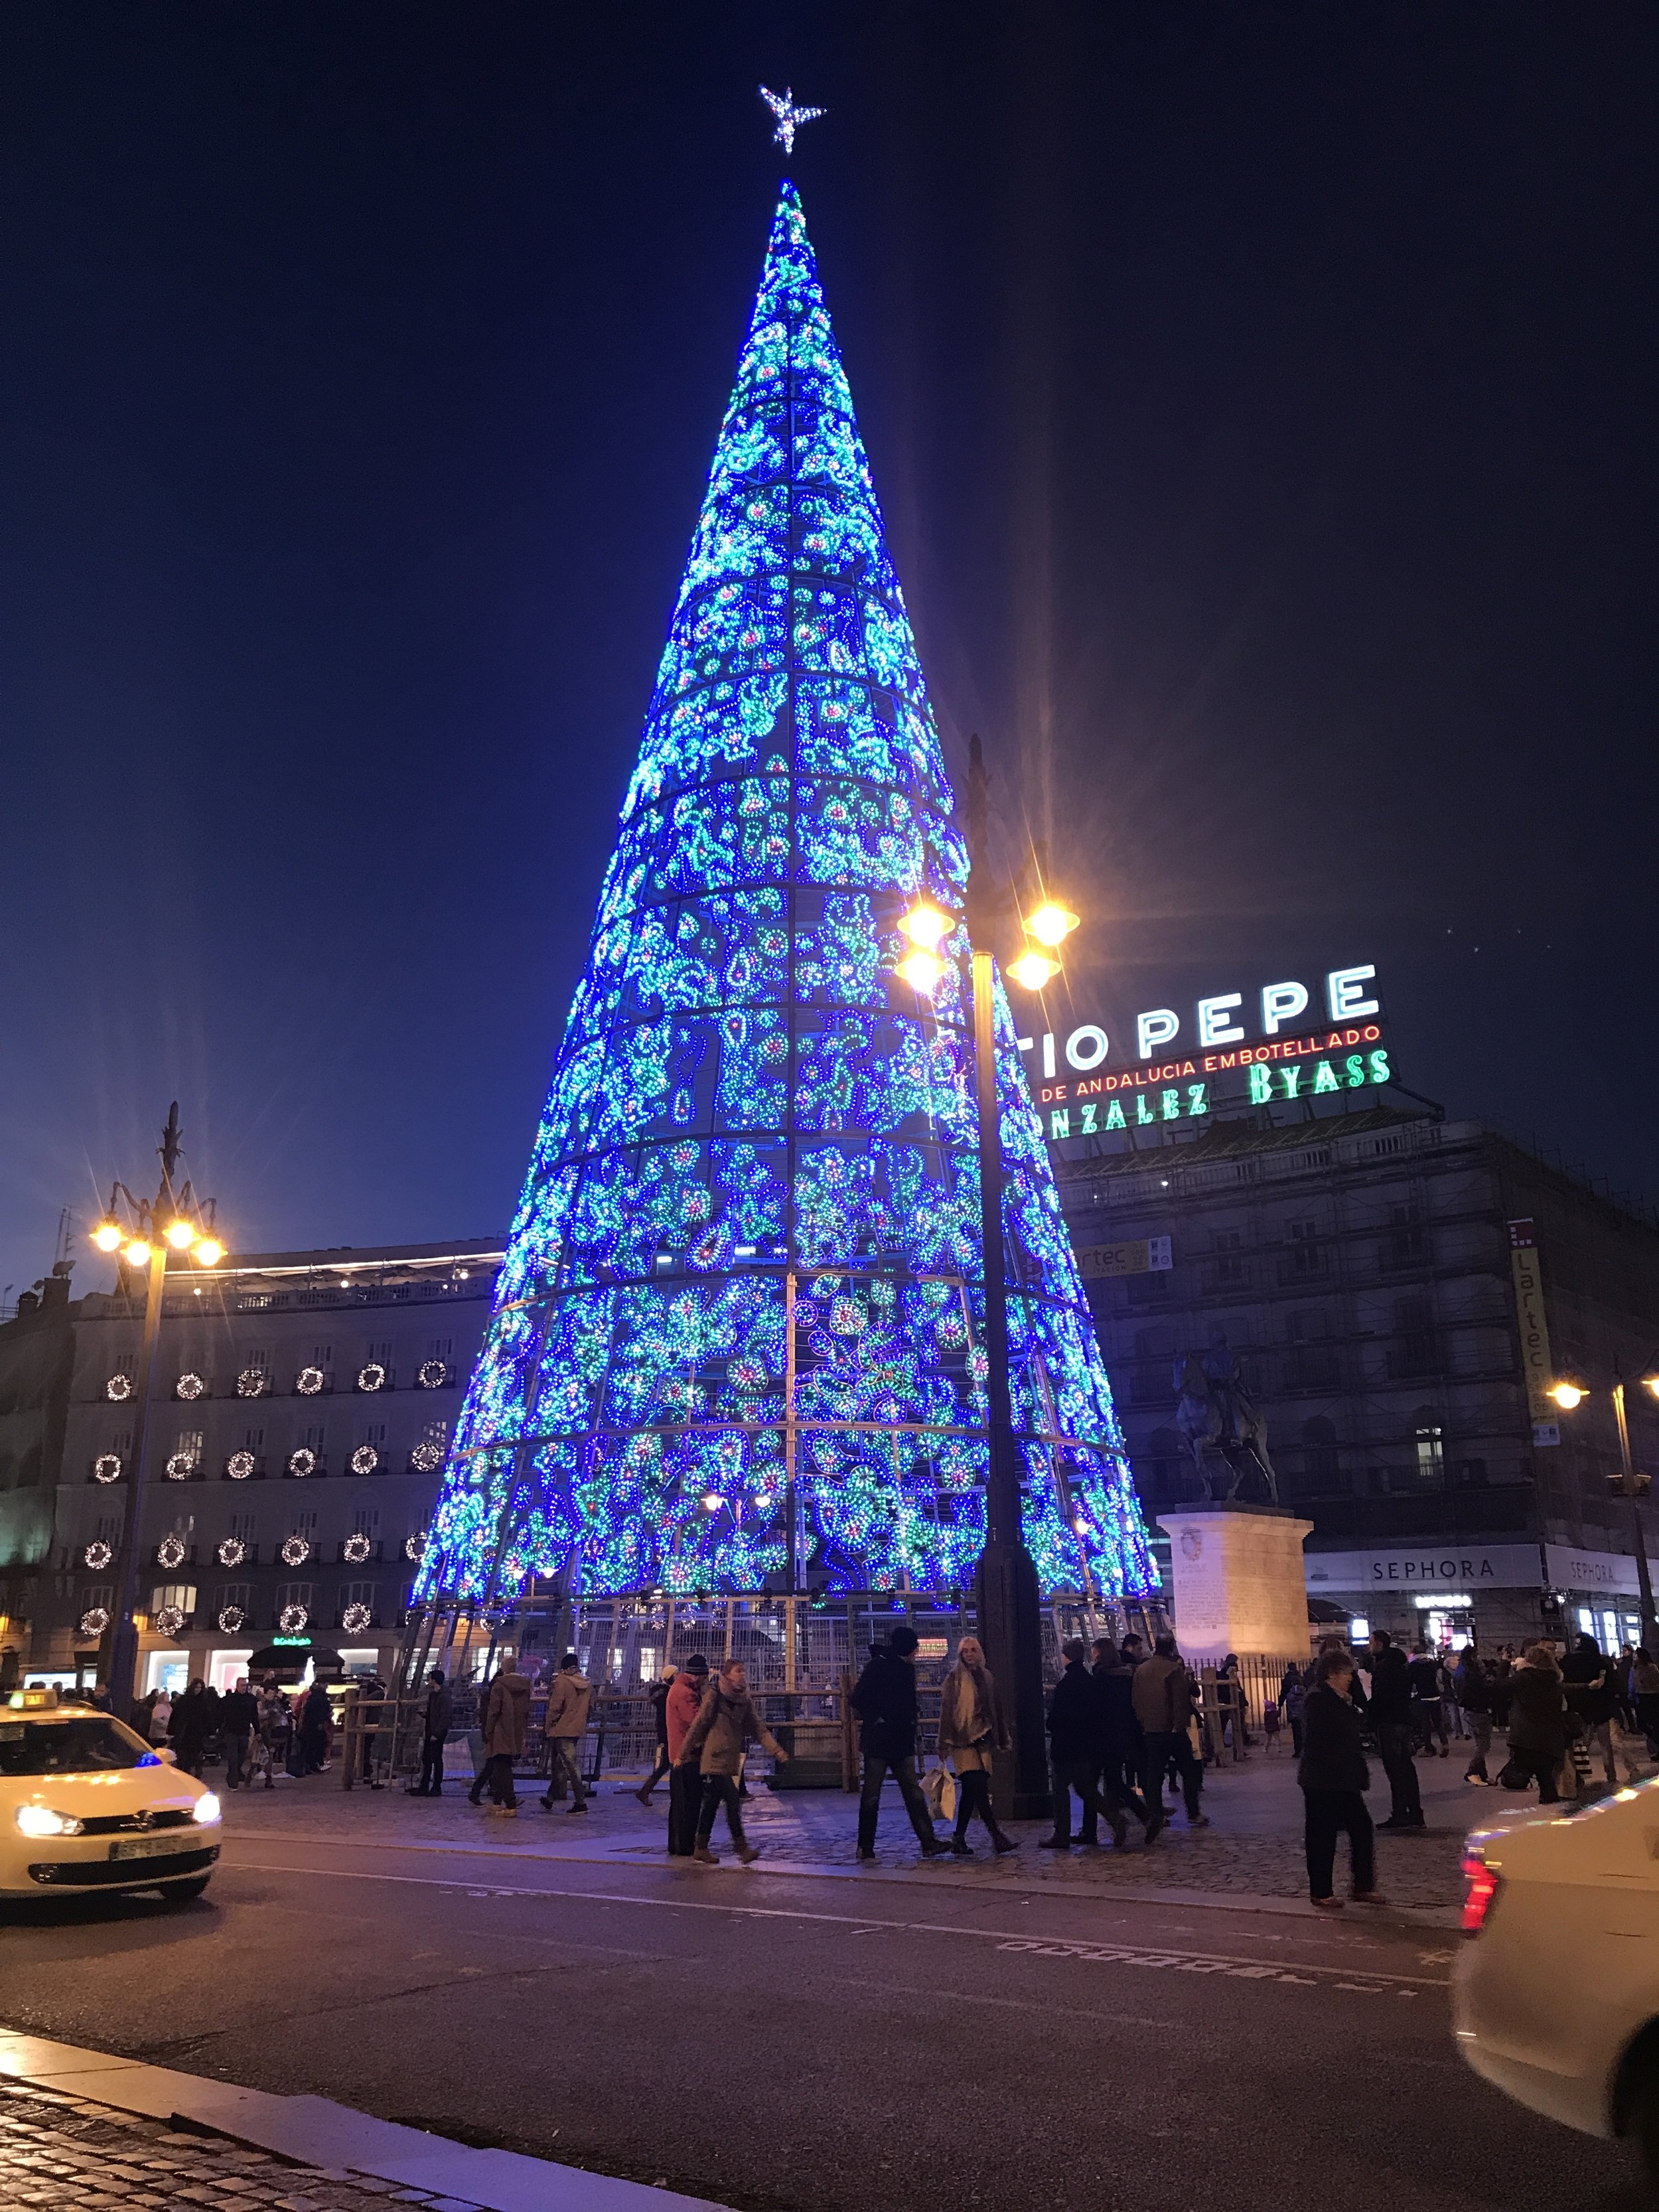 Insiders Guide To Madrid's Christmas Markets image asset